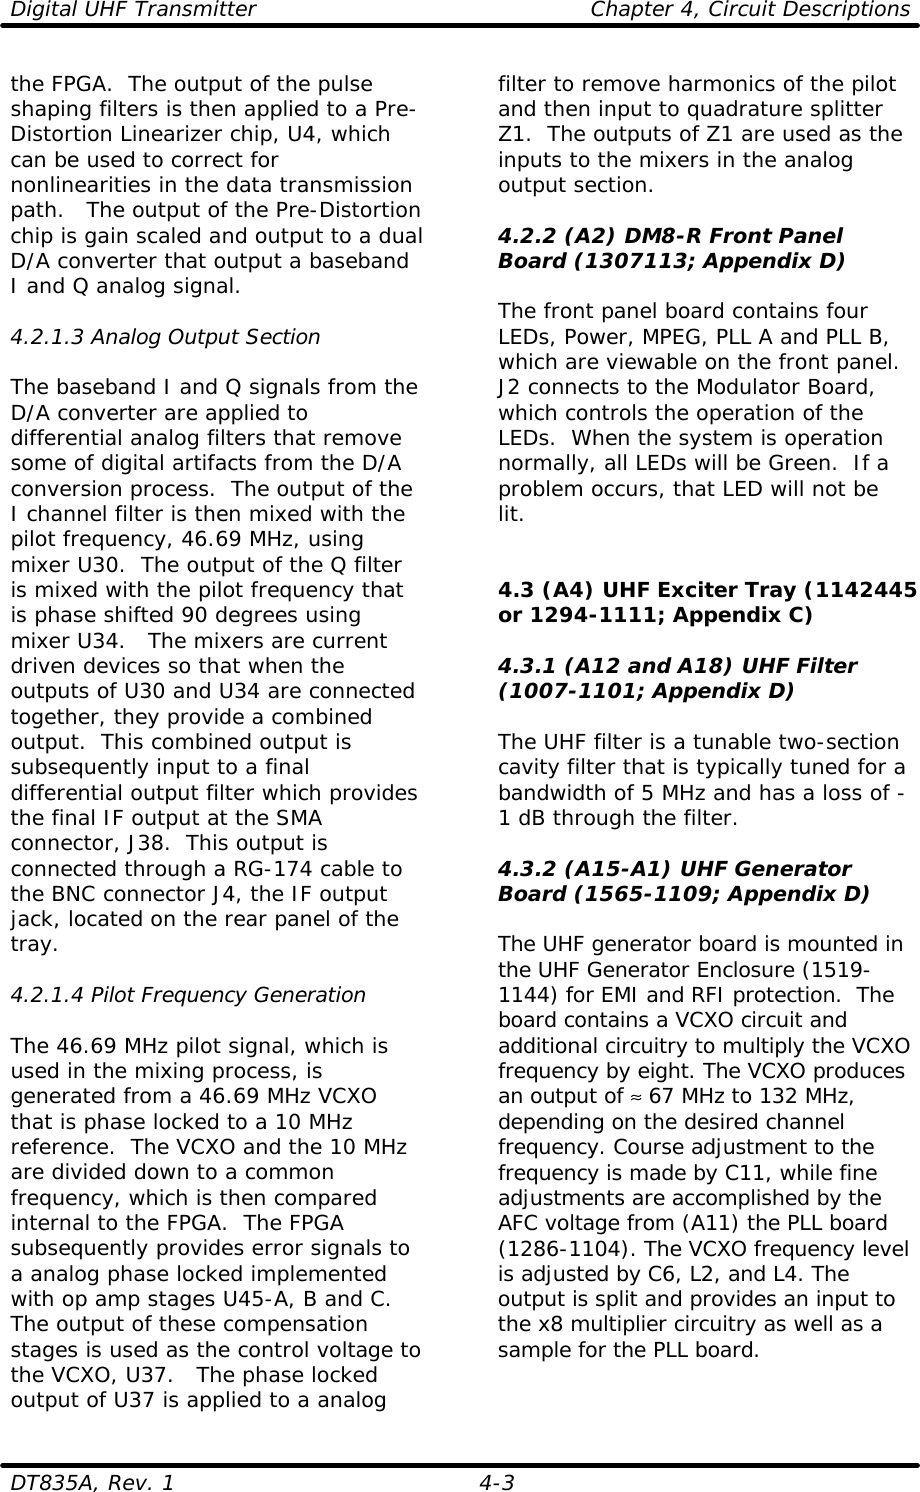 Digital UHF Transmitter    Chapter 4, Circuit Descriptions  DT835A, Rev. 1    4-3 the FPGA.  The output of the pulse shaping filters is then applied to a Pre-Distortion Linearizer chip, U4, which can be used to correct for nonlinearities in the data transmission path.   The output of the Pre-Distortion chip is gain scaled and output to a dual D/A converter that output a baseband I and Q analog signal.  4.2.1.3 Analog Output Section  The baseband I and Q signals from the D/A converter are applied to differential analog filters that remove some of digital artifacts from the D/A conversion process.  The output of the I channel filter is then mixed with the pilot frequency, 46.69 MHz, using mixer U30.  The output of the Q filter is mixed with the pilot frequency that is phase shifted 90 degrees using mixer U34.   The mixers are current driven devices so that when the outputs of U30 and U34 are connected together, they provide a combined output.  This combined output is subsequently input to a final differential output filter which provides the final IF output at the SMA connector, J38.  This output is connected through a RG-174 cable to the BNC connector J4, the IF output jack, located on the rear panel of the tray.  4.2.1.4 Pilot Frequency Generation  The 46.69 MHz pilot signal, which is used in the mixing process, is generated from a 46.69 MHz VCXO that is phase locked to a 10 MHz reference.  The VCXO and the 10 MHz are divided down to a common frequency, which is then compared internal to the FPGA.  The FPGA subsequently provides error signals to a analog phase locked implemented with op amp stages U45-A, B and C.  The output of these compensation stages is used as the control voltage to the VCXO, U37.   The phase locked output of U37 is applied to a analog filter to remove harmonics of the pilot and then input to quadrature splitter Z1.  The outputs of Z1 are used as the inputs to the mixers in the analog output section.  4.2.2 (A2) DM8-R Front Panel Board (1307113; Appendix D)  The front panel board contains four LEDs, Power, MPEG, PLL A and PLL B, which are viewable on the front panel.  J2 connects to the Modulator Board, which controls the operation of the LEDs.  When the system is operation normally, all LEDs will be Green.  If a problem occurs, that LED will not be lit.   4.3 (A4) UHF Exciter Tray (1142445 or 1294-1111; Appendix C)  4.3.1 (A12 and A18) UHF Filter (1007-1101; Appendix D)  The UHF filter is a tunable two-section cavity filter that is typically tuned for a bandwidth of 5 MHz and has a loss of -1 dB through the filter.  4.3.2 (A15-A1) UHF Generator Board (1565-1109; Appendix D)  The UHF generator board is mounted in the UHF Generator Enclosure (1519-1144) for EMI and RFI protection.  The board contains a VCXO circuit and additional circuitry to multiply the VCXO frequency by eight. The VCXO produces an output of ≈ 67 MHz to 132 MHz, depending on the desired channel frequency. Course adjustment to the frequency is made by C11, while fine adjustments are accomplished by the AFC voltage from (A11) the PLL board (1286-1104). The VCXO frequency level is adjusted by C6, L2, and L4. The output is split and provides an input to the x8 multiplier circuitry as well as a sample for the PLL board.  